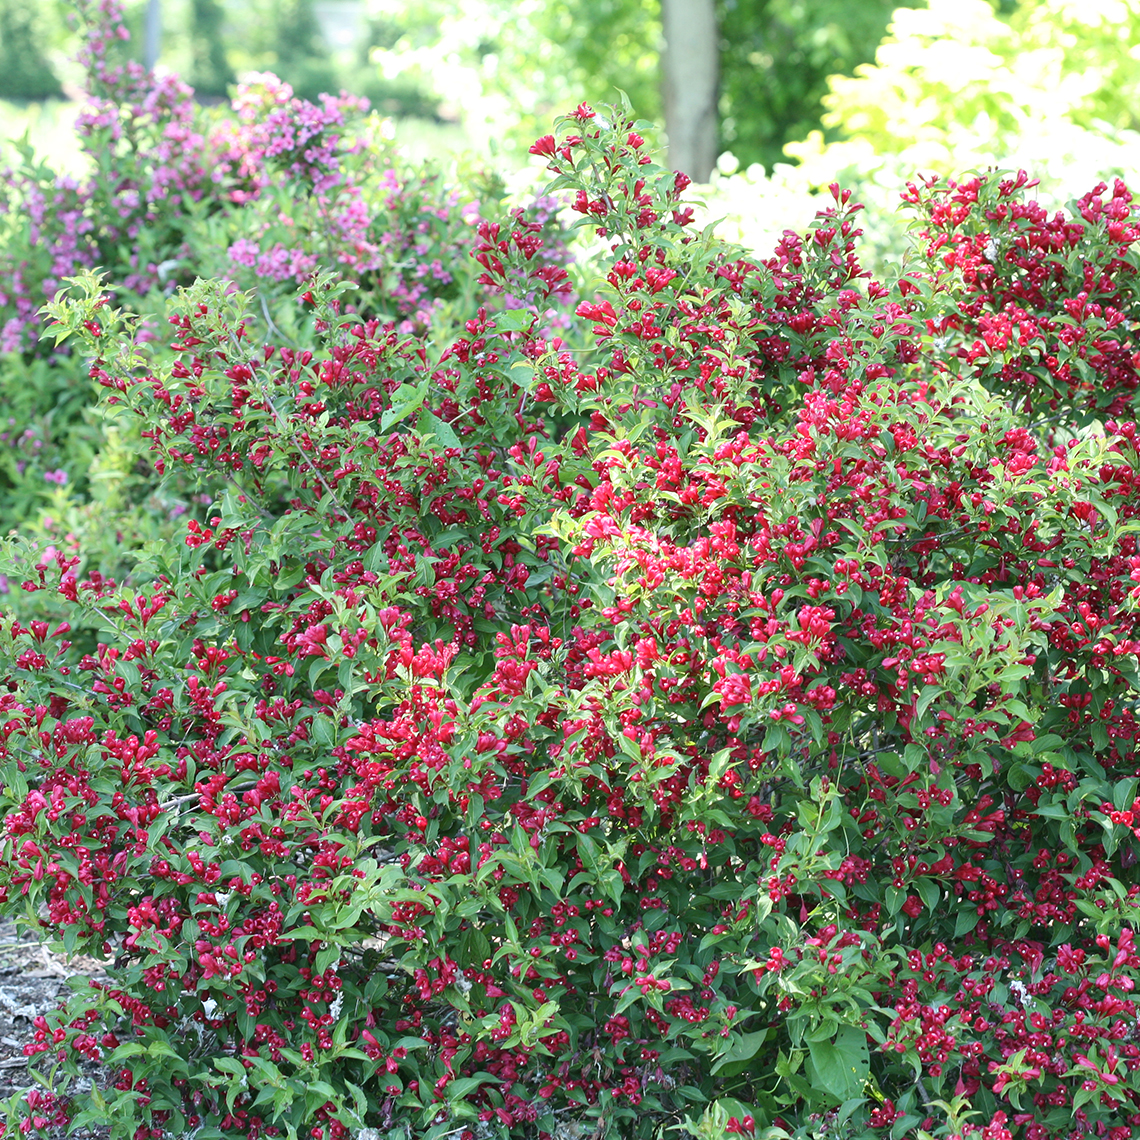 Sonic Bloom Red weigela blooming in the landscape